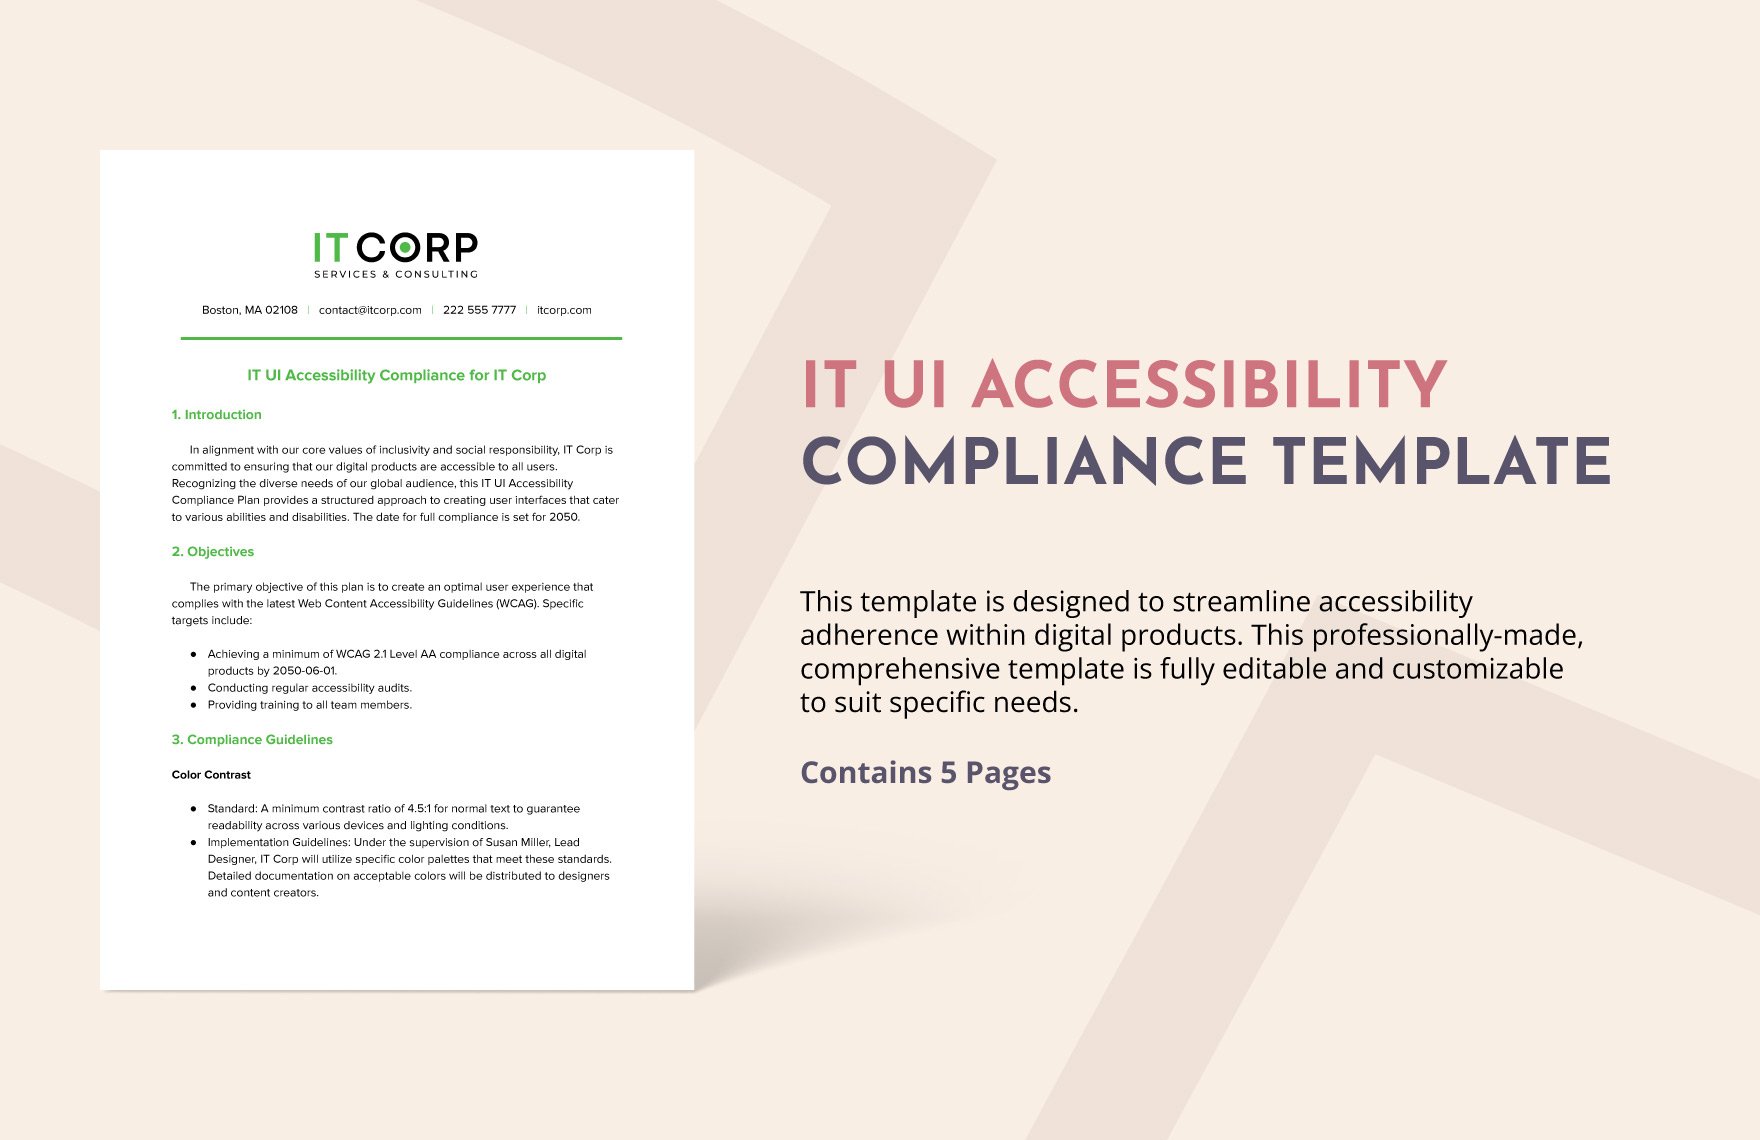 IT UI Accessibility Compliance Template